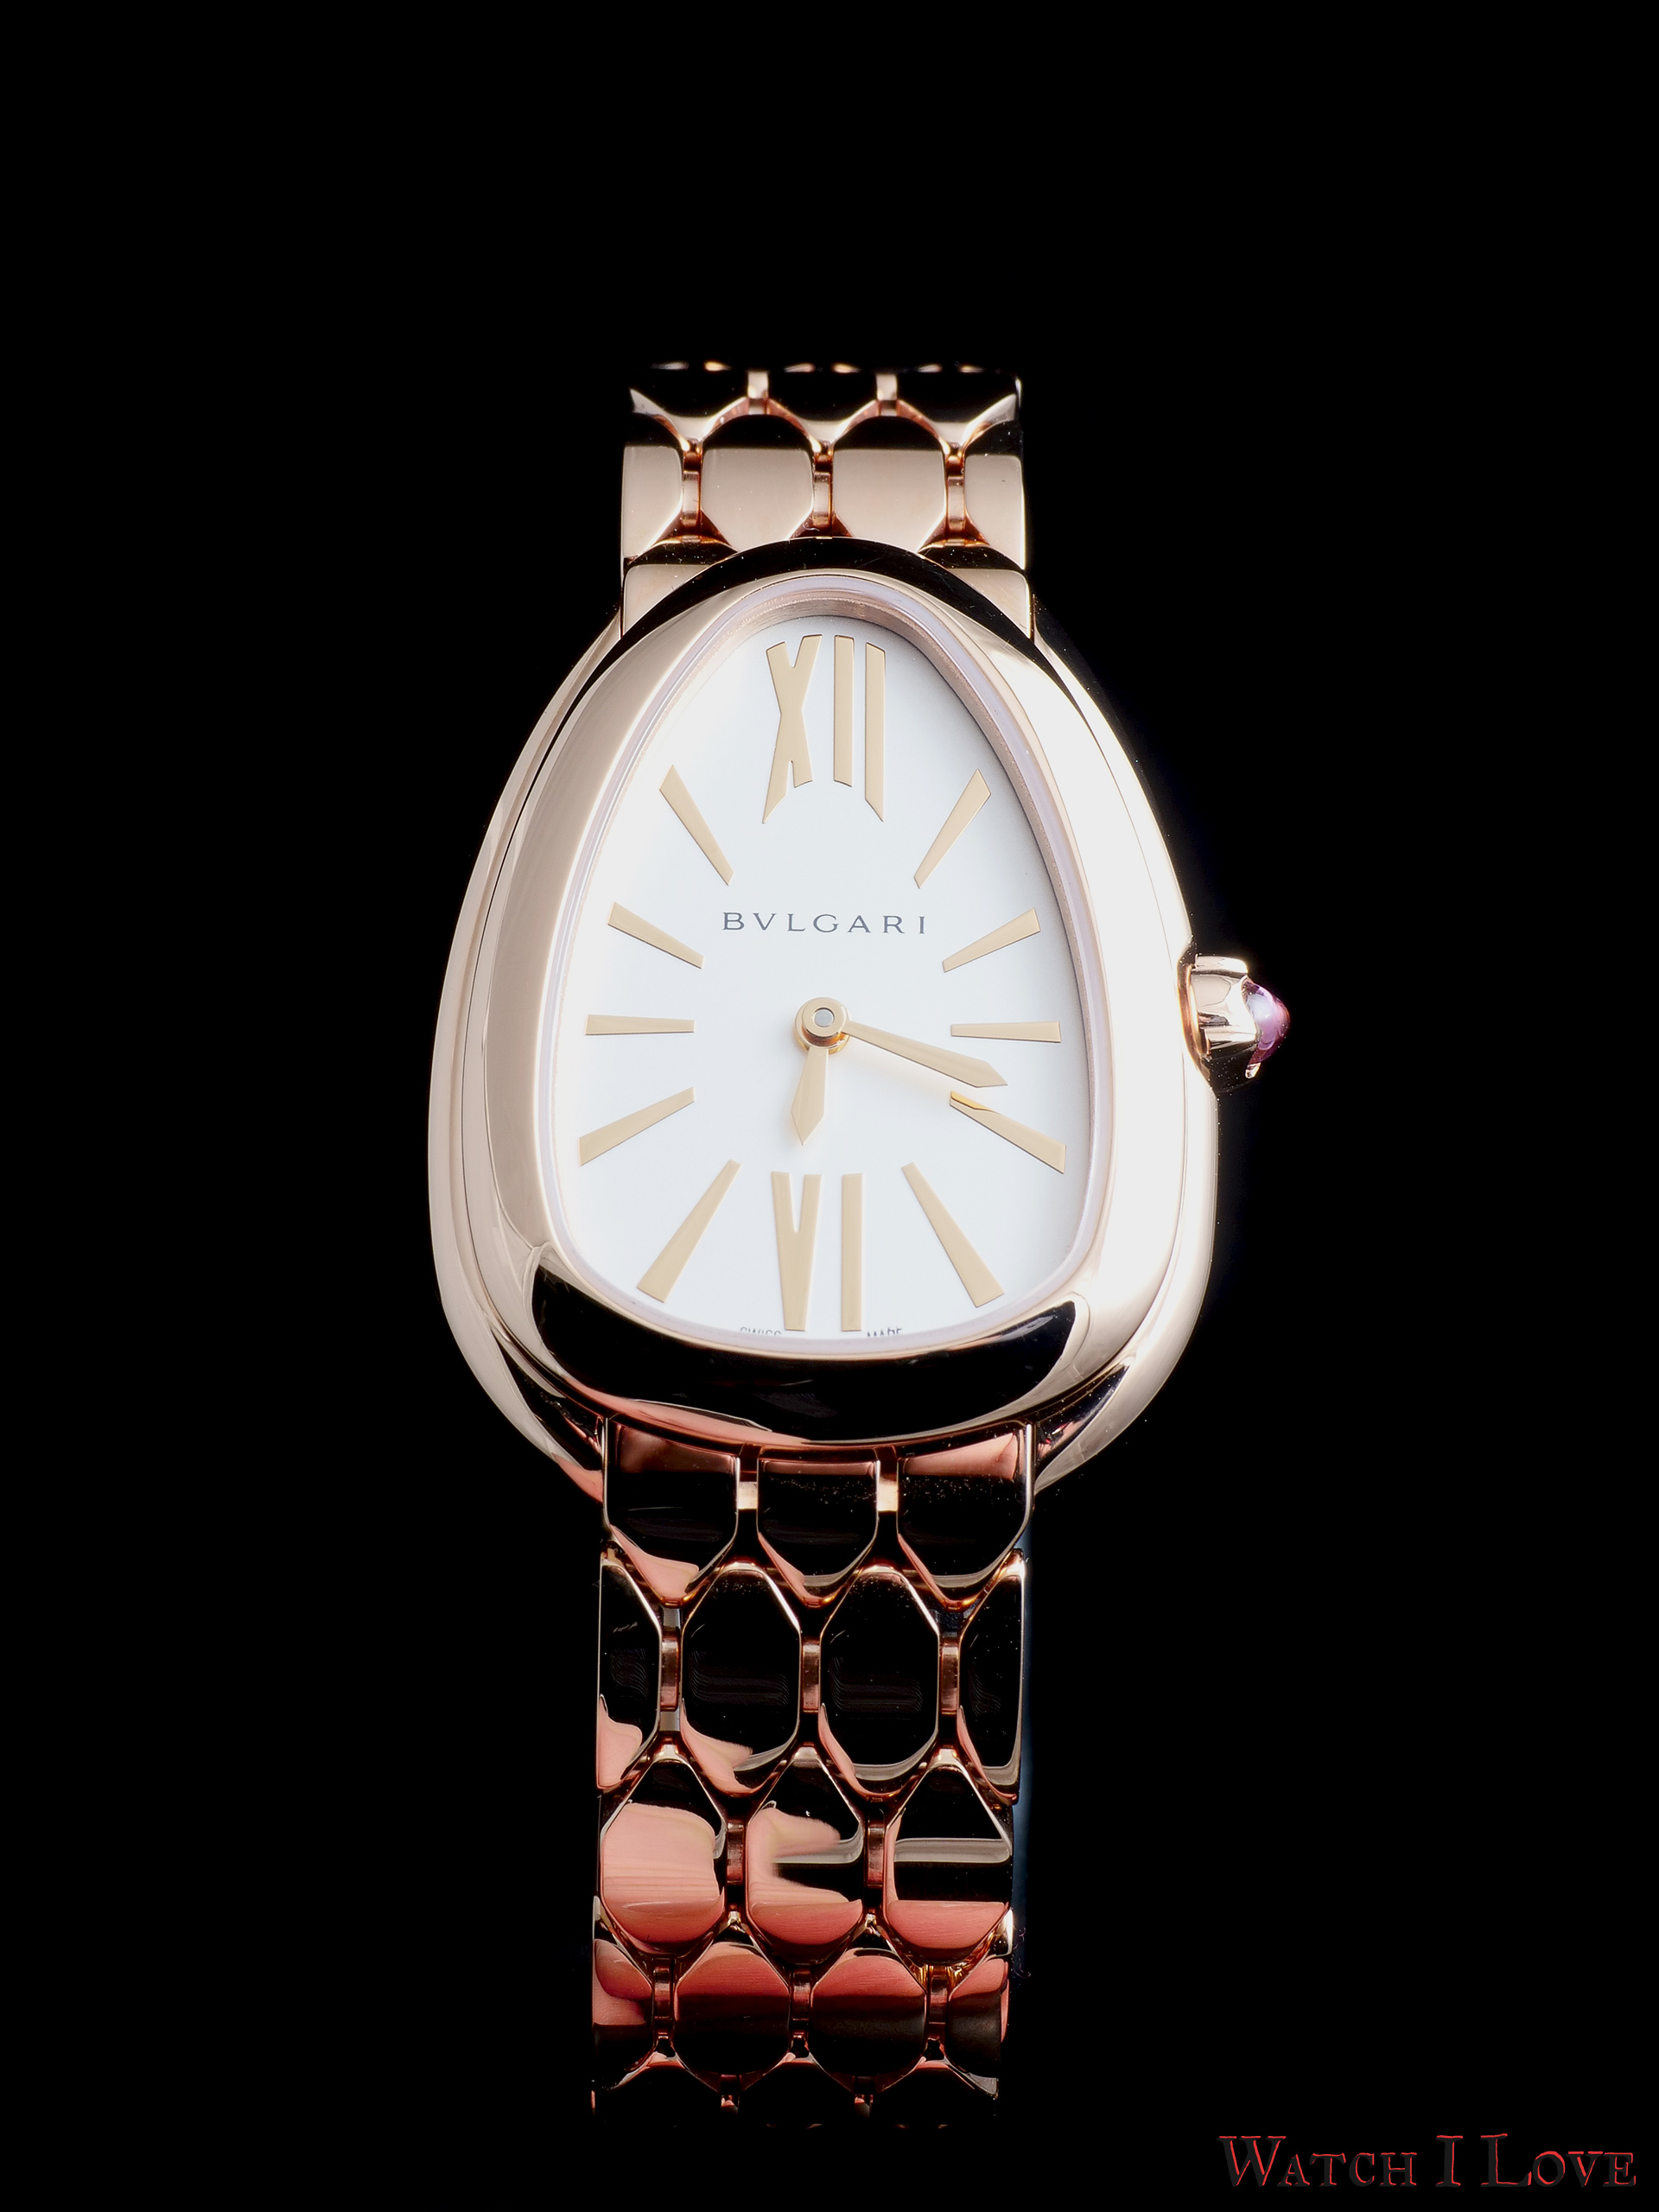 bvlgari new collection watches